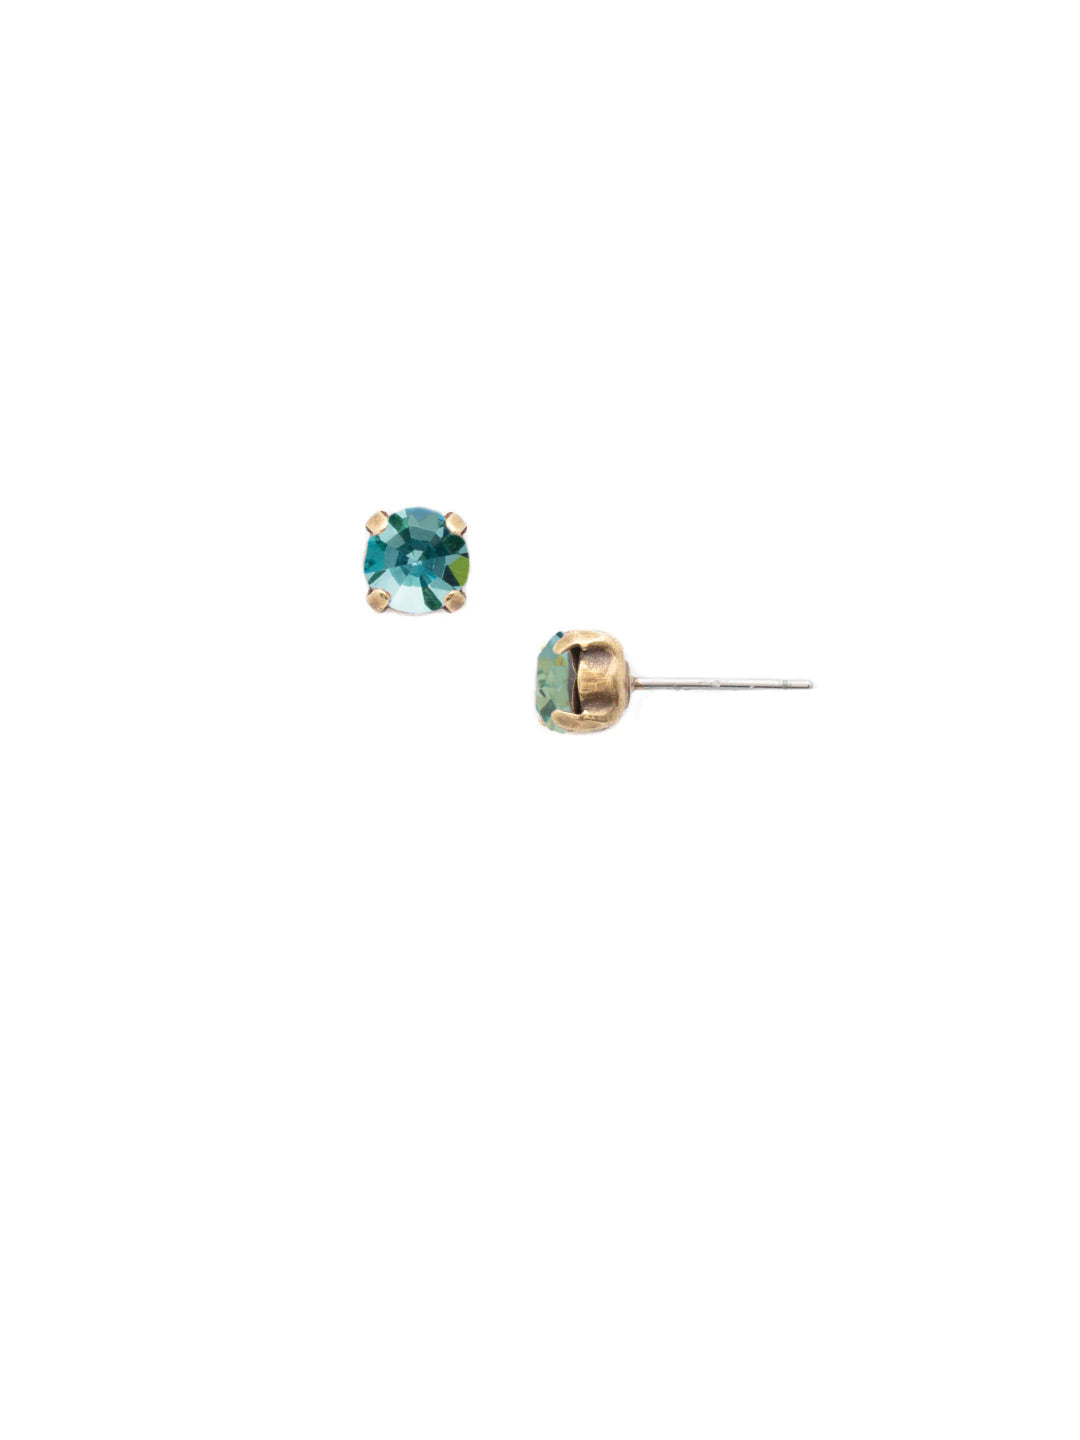 Jayda Stud Earrings - EDN32AGAQU - <p>The Jayda Stud Earrings are the perfect every day wardrobe staple. A round crystal nestles perfectly in a metal plated post with four prongs. </p><p>Need help picking a stud? <a href="https://www.sorrelli.com/blogs/sisterhood/round-stud-earrings-101-a-rundown-of-sizes-styles-and-sparkle">Check out our size guide!</a> From Sorrelli's Aquamarine collection in our Antique Gold-tone finish.</p>